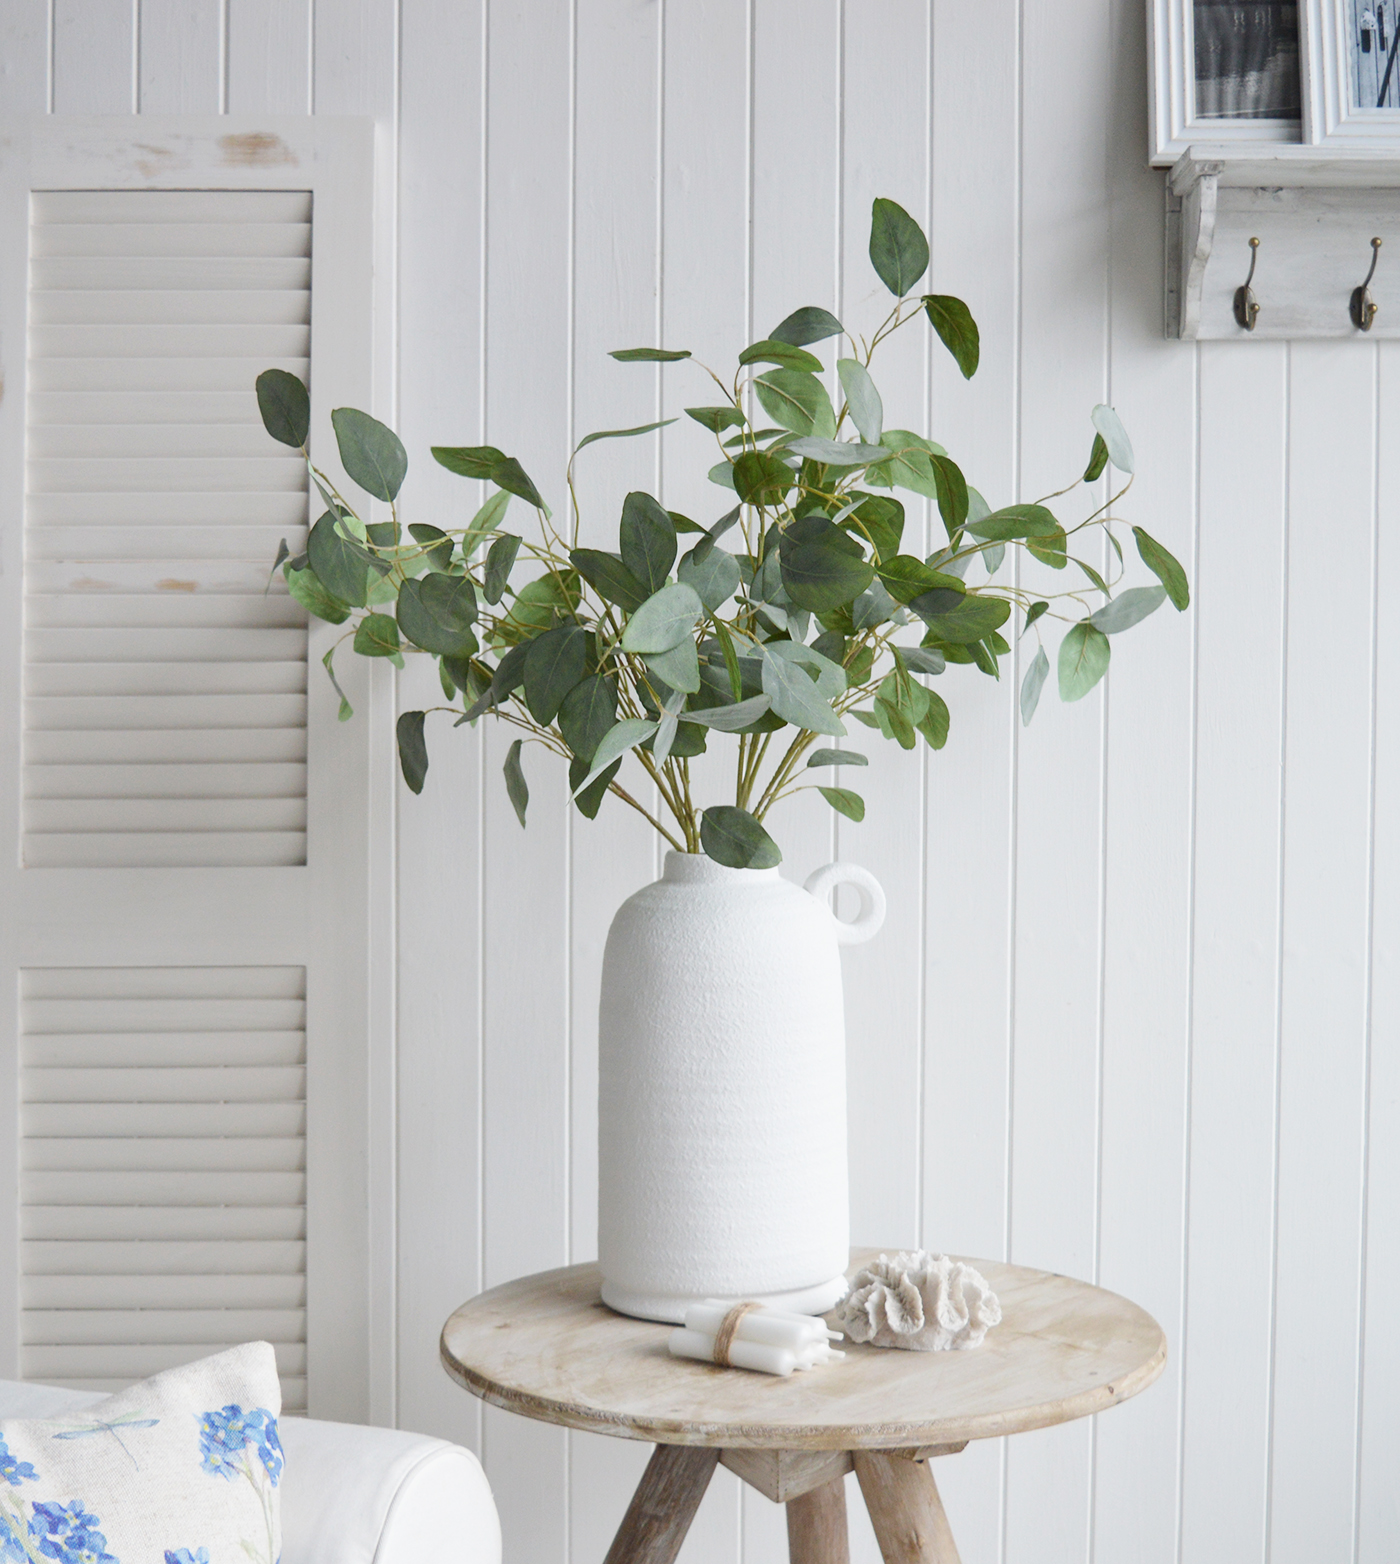 Putney White Vase  from The White Lighthouse , New England style furniture and accessories for country, coastal and modern farmhouse styled homes and interiors